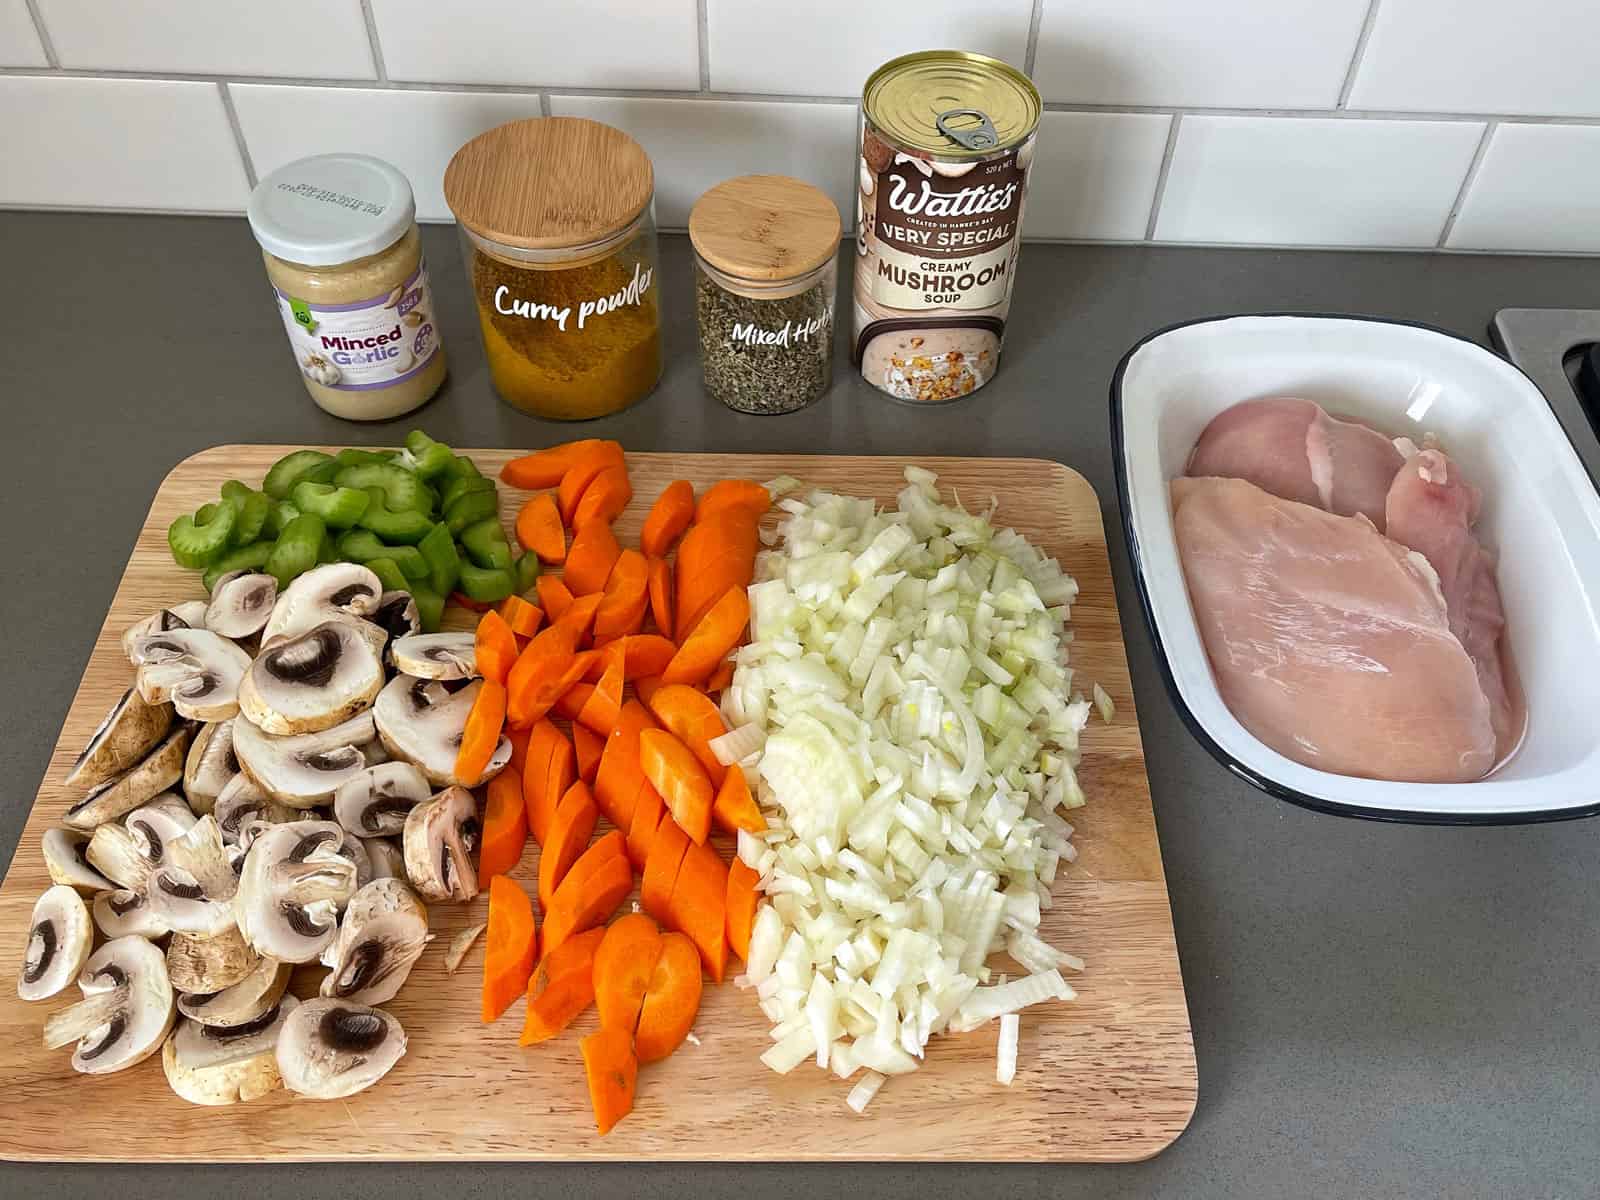 Ingredients for chicken pot pie on a grey bench